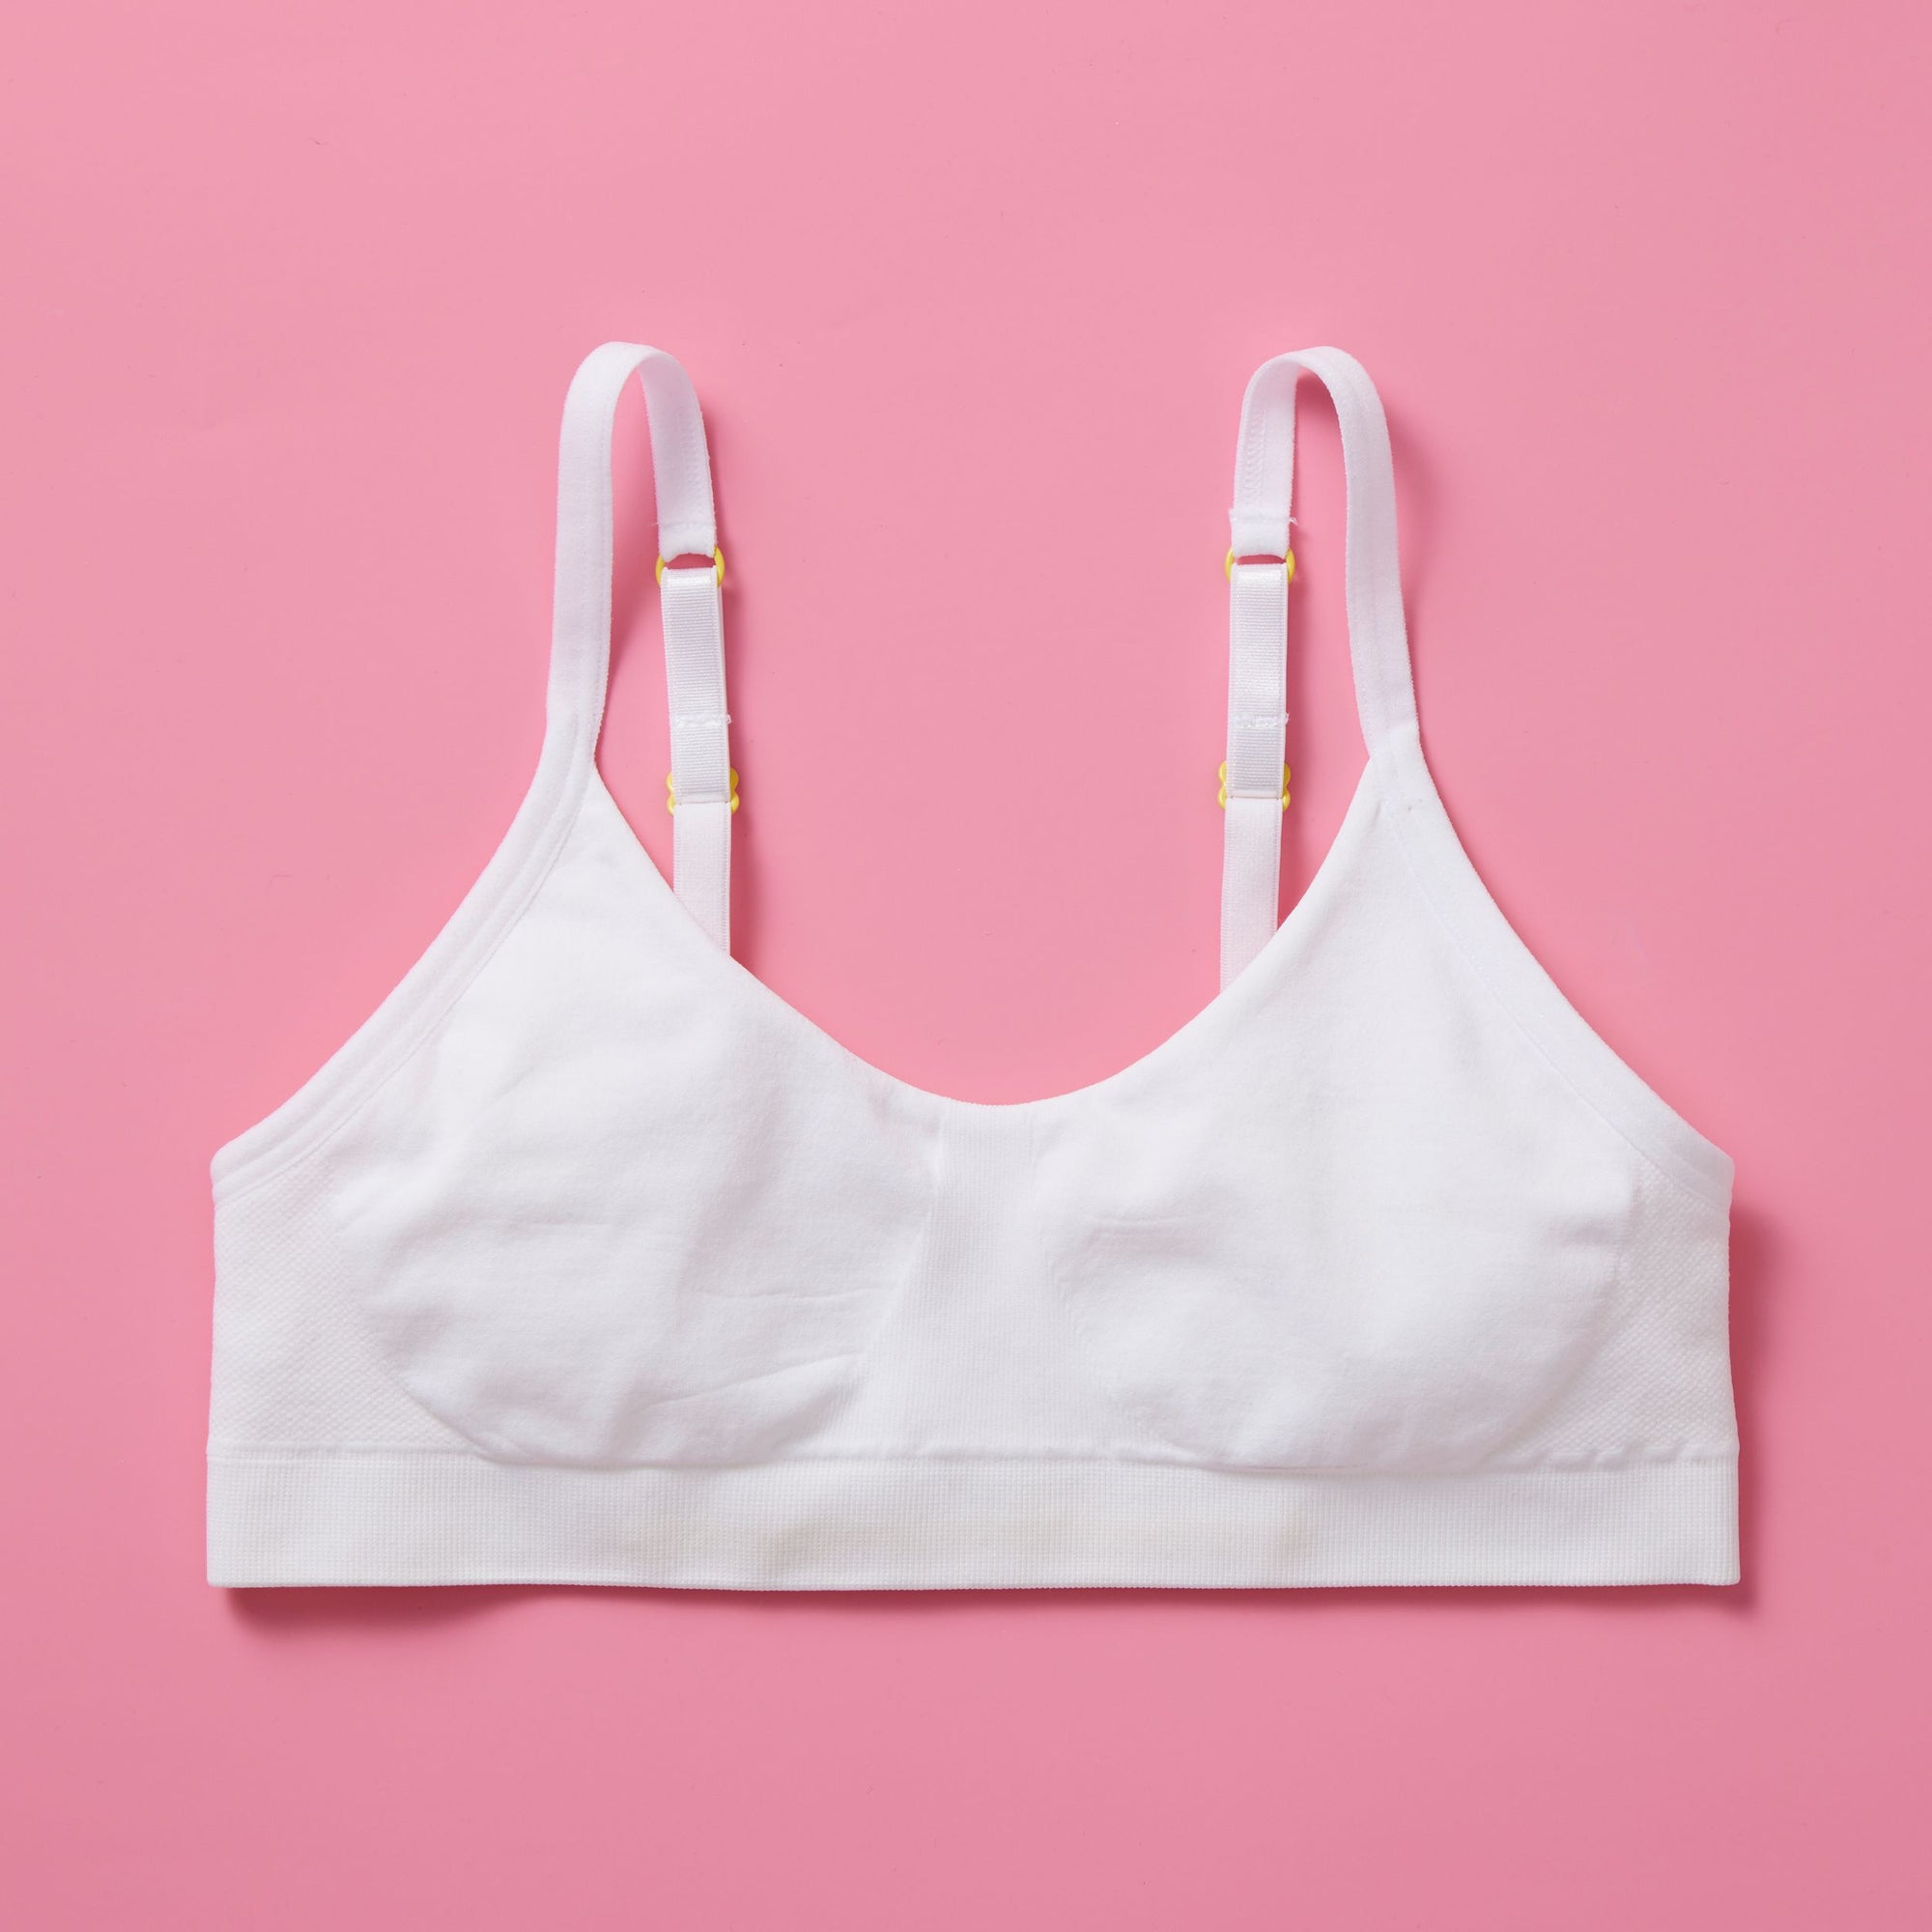 The sports bra solution for girls who don't quite need a sports bra.